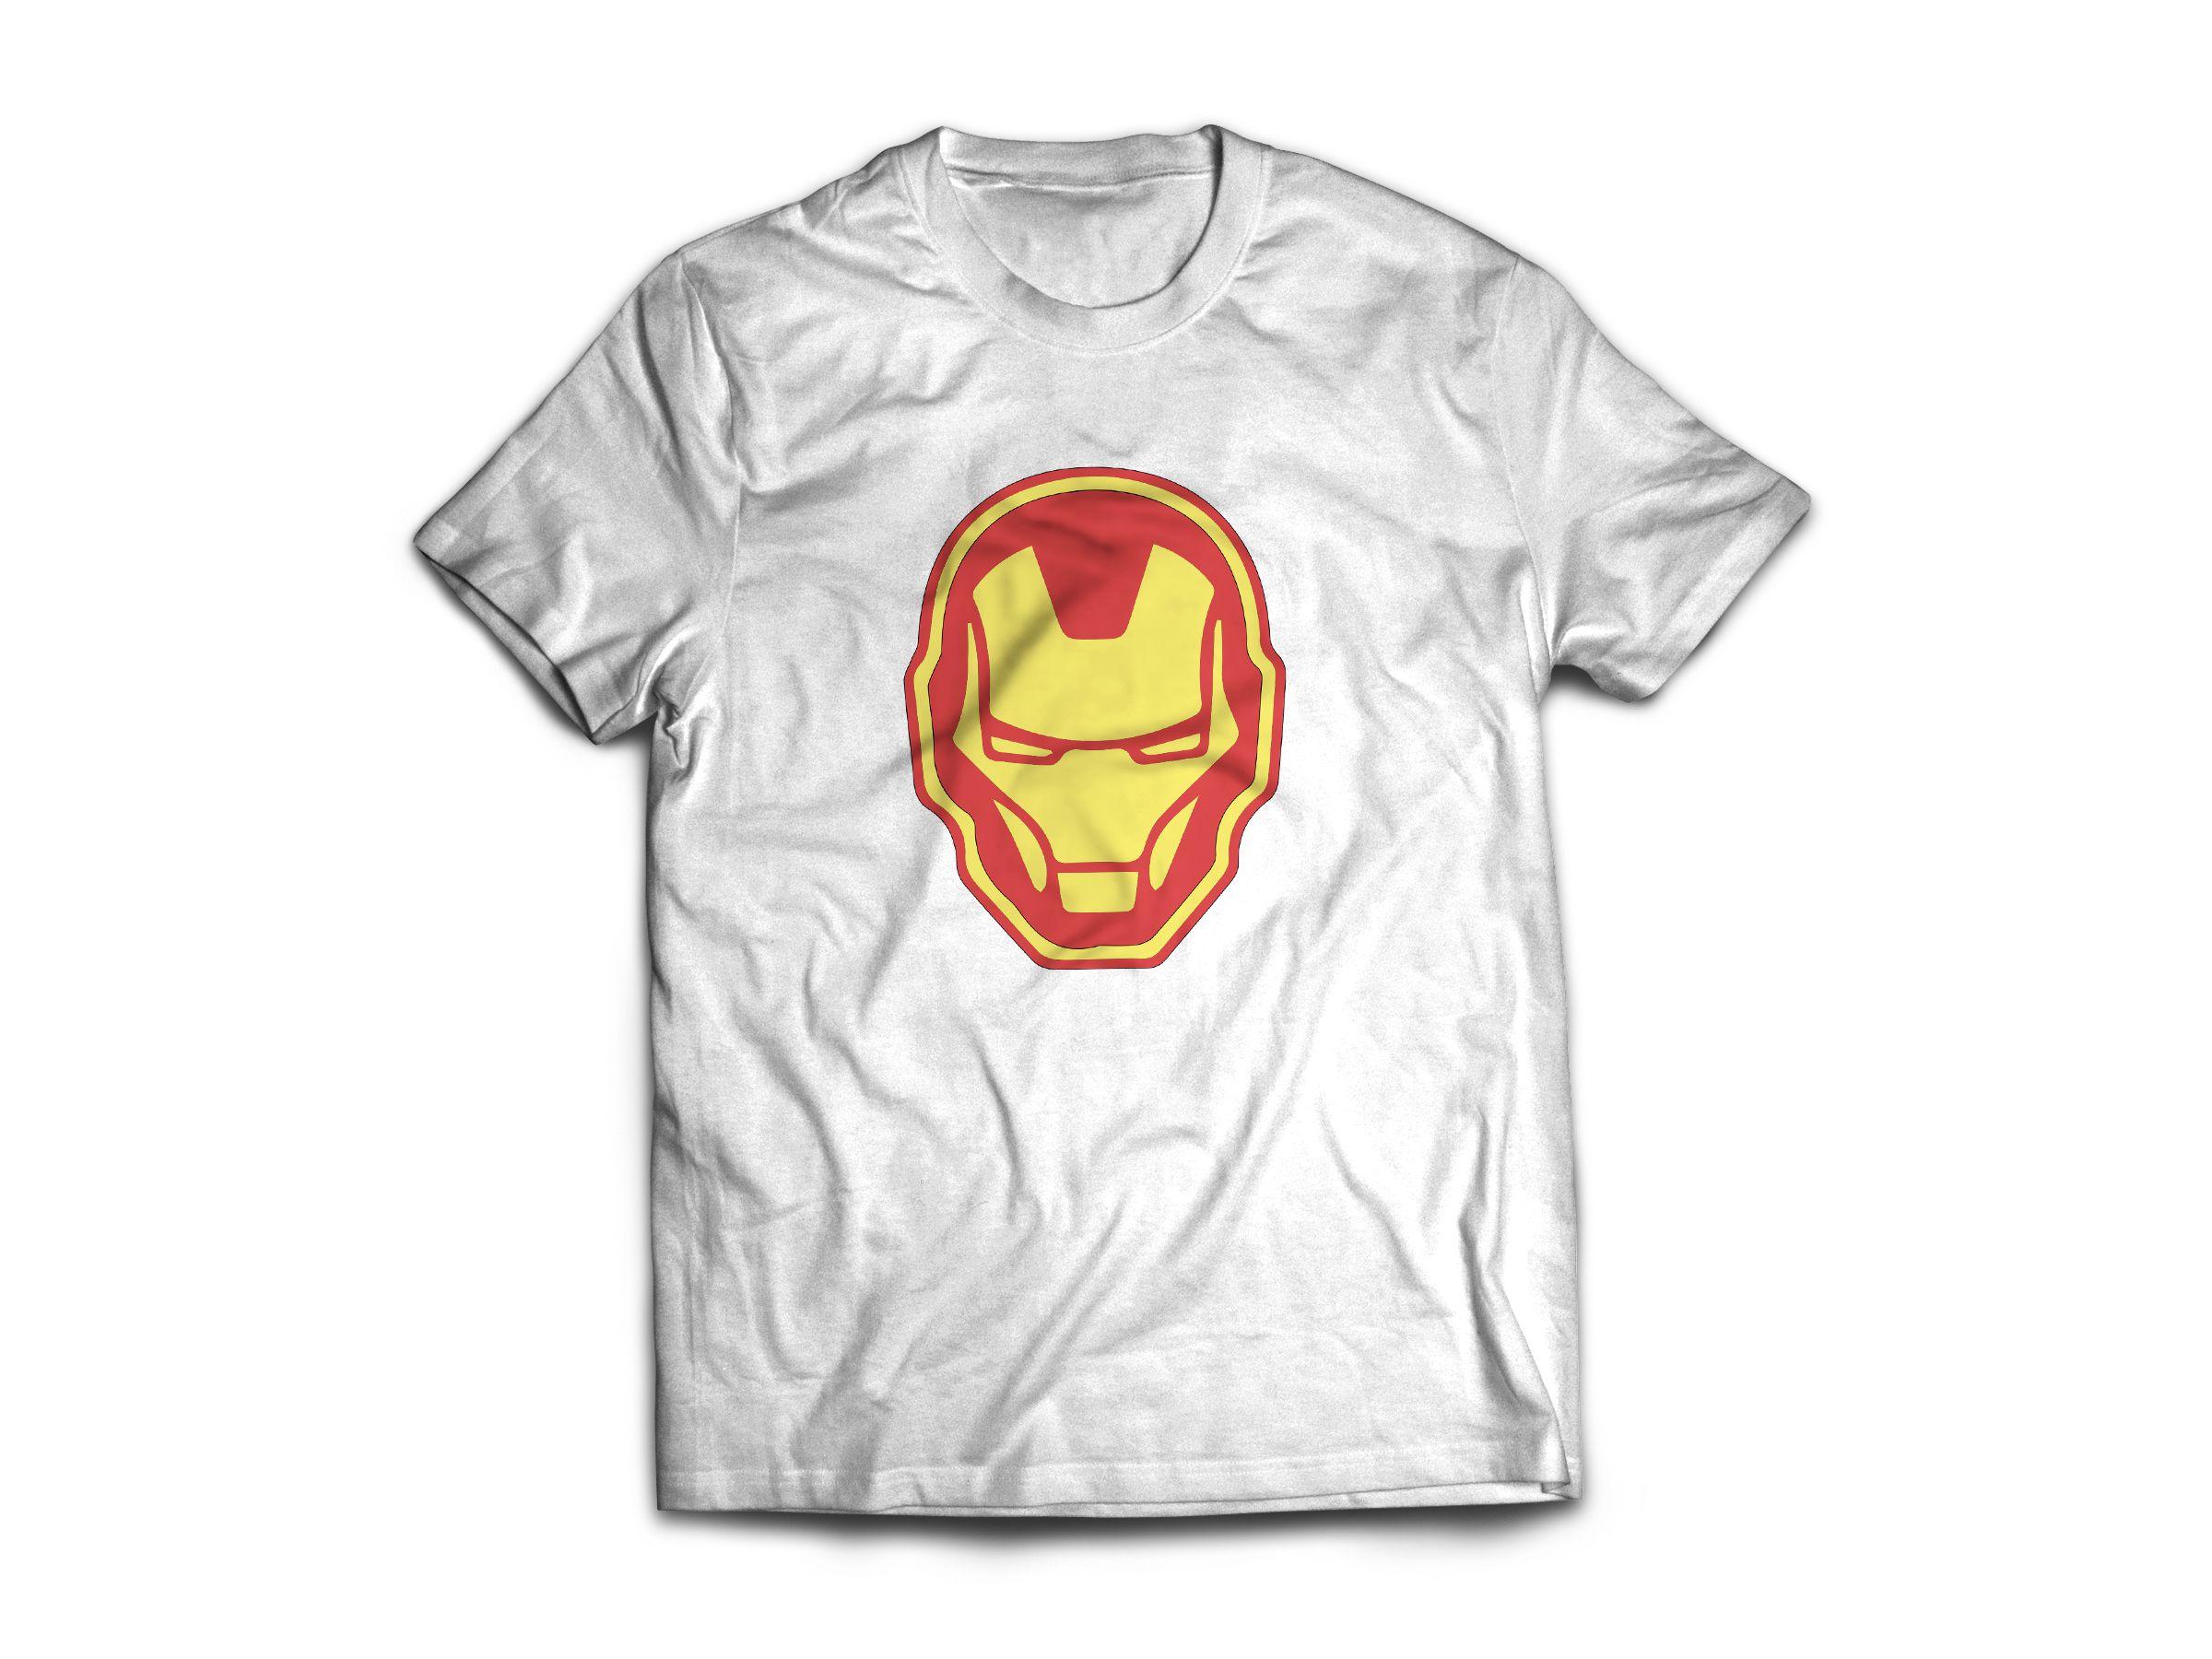 Red White Blue Face Logo - Iron-Man Red and Yellow Face Logo T-Shirt | The Custom Shop